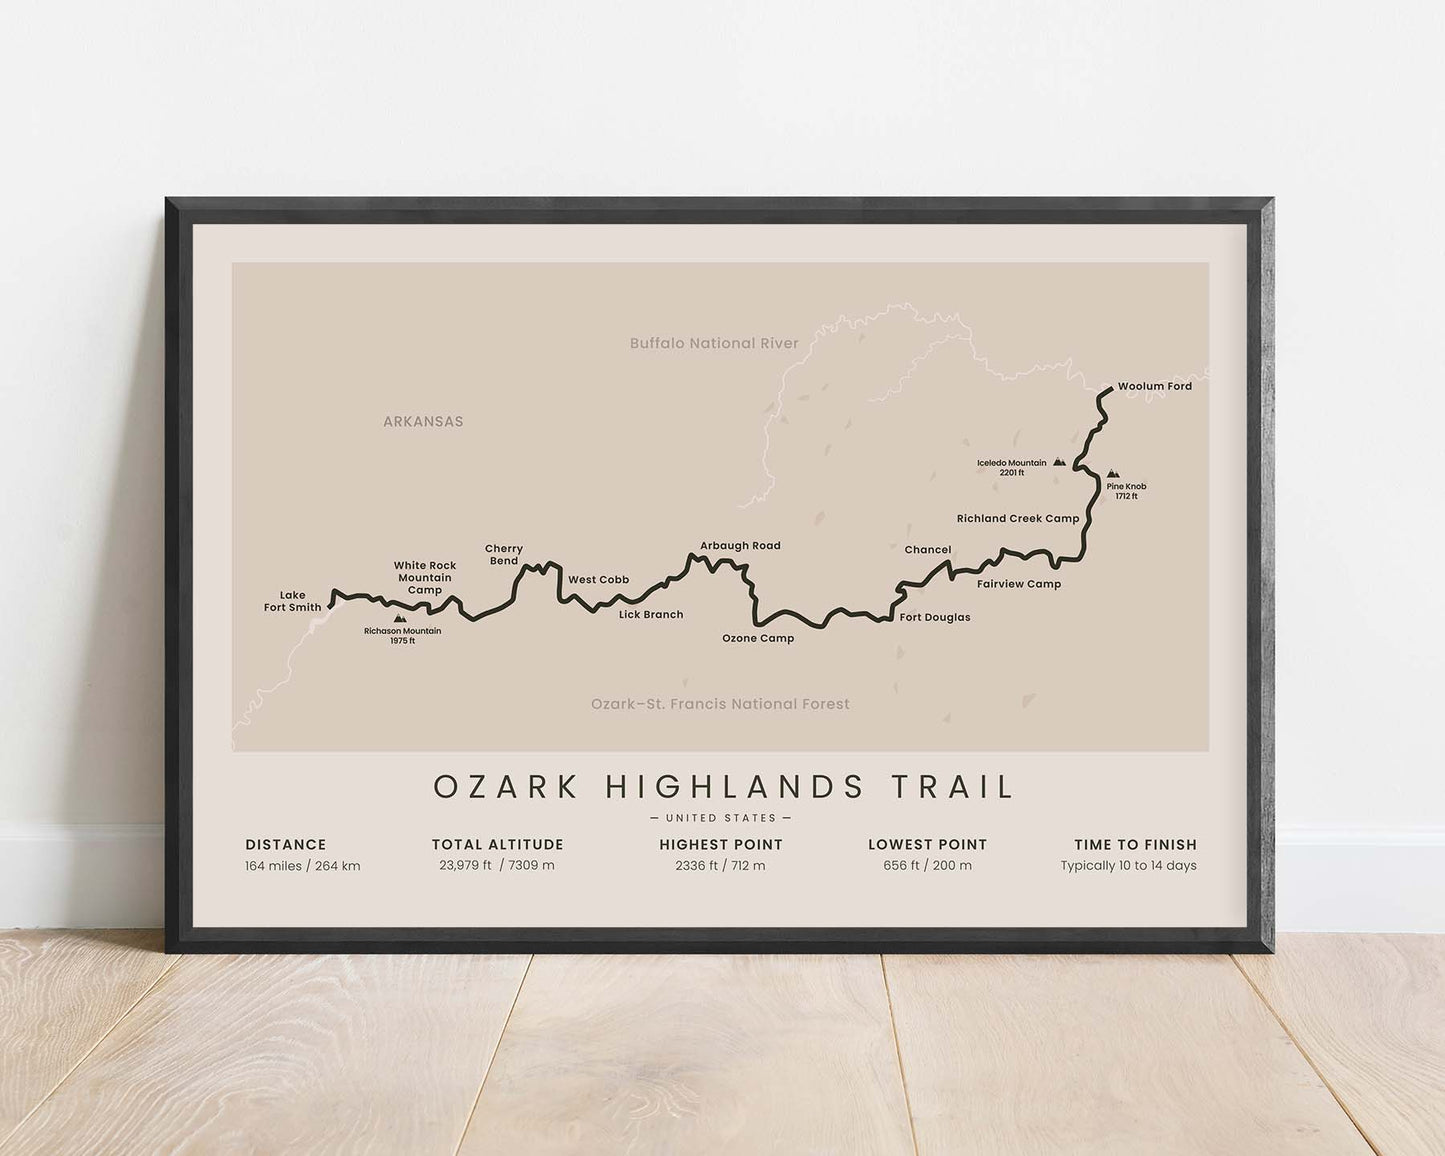 Ozark Highlands Trail (Arkansas, Ozark National Forest, Lake Fort Smith to Woolum Ford, Lake Fort Smith State Park to Buffalo National River, Ozark Mountains) Route Wall Map with Beige Background